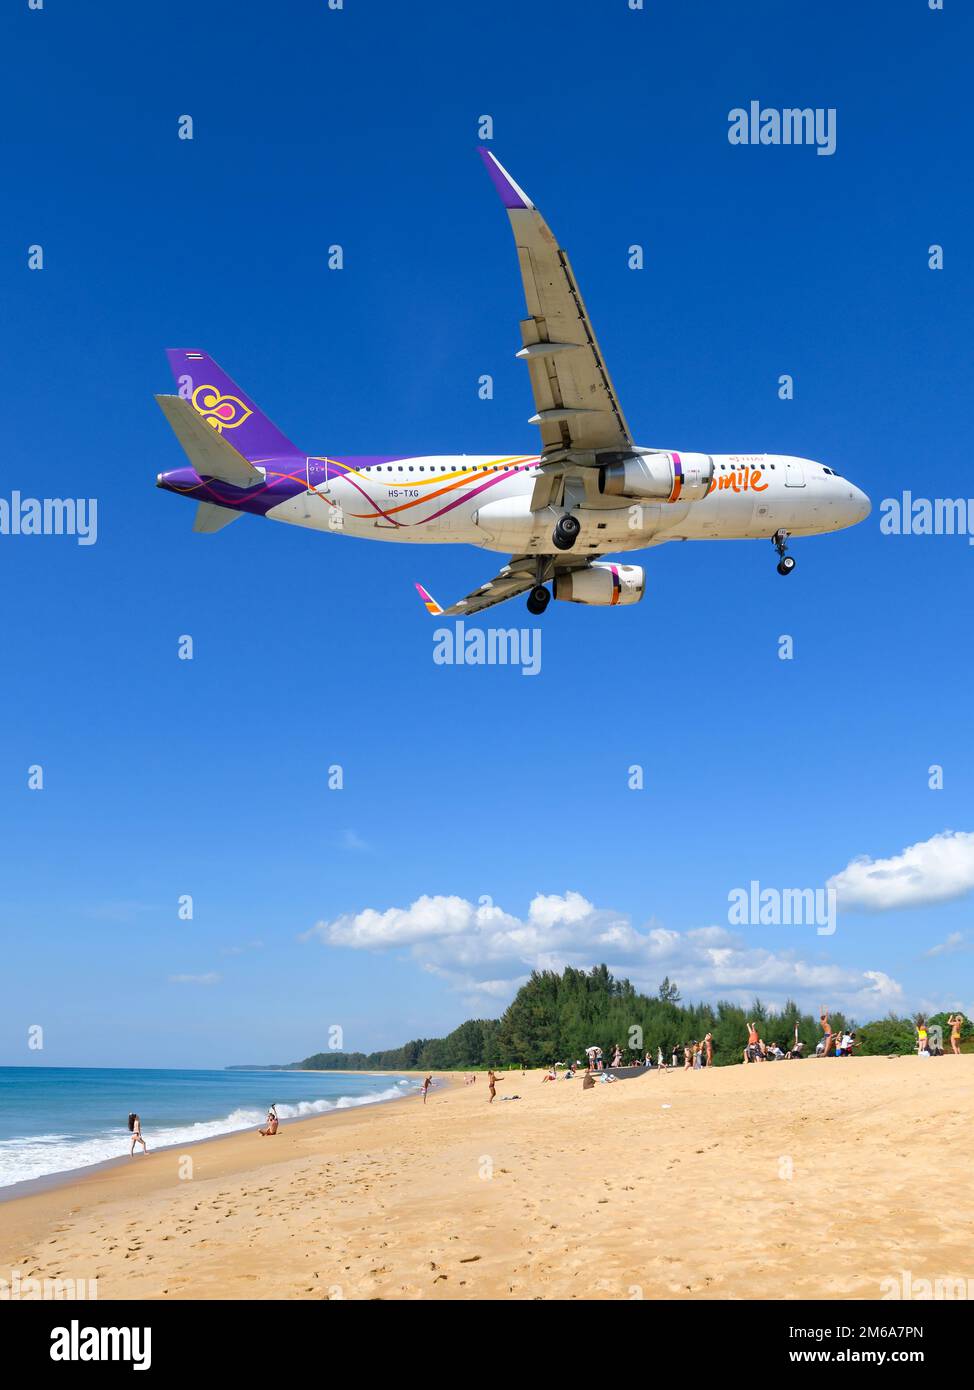 Thai Smile airline Airbus A320 aircraft over Mai Khao Beach by Phuket Airport. Airplane A320 of Thai Smile Airways flying over touristic beach. Stock Photo